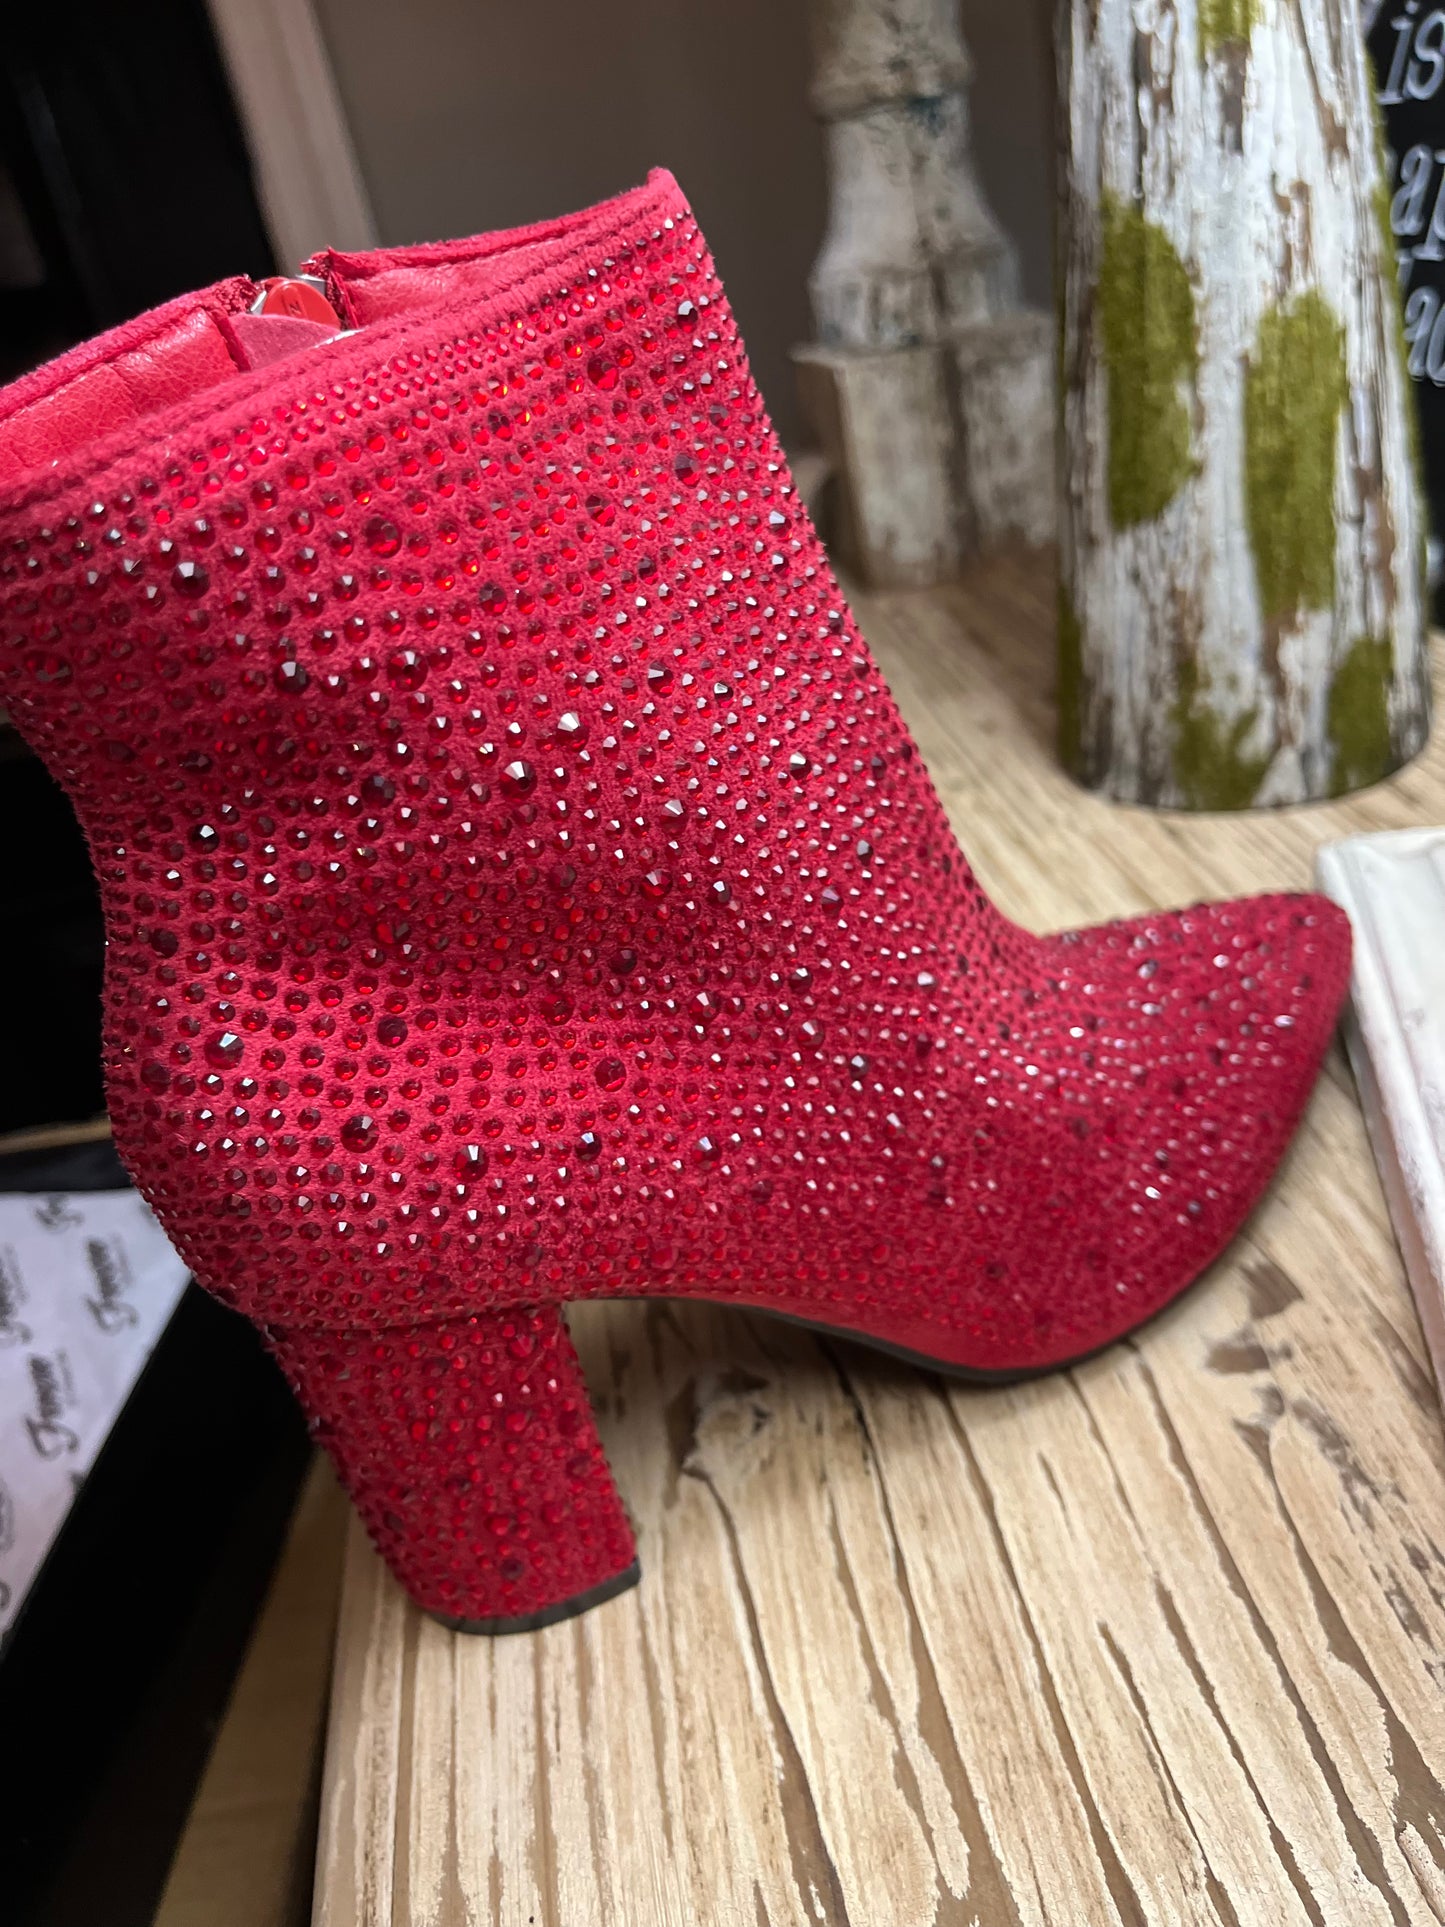 Red Rhinestone ankle boots